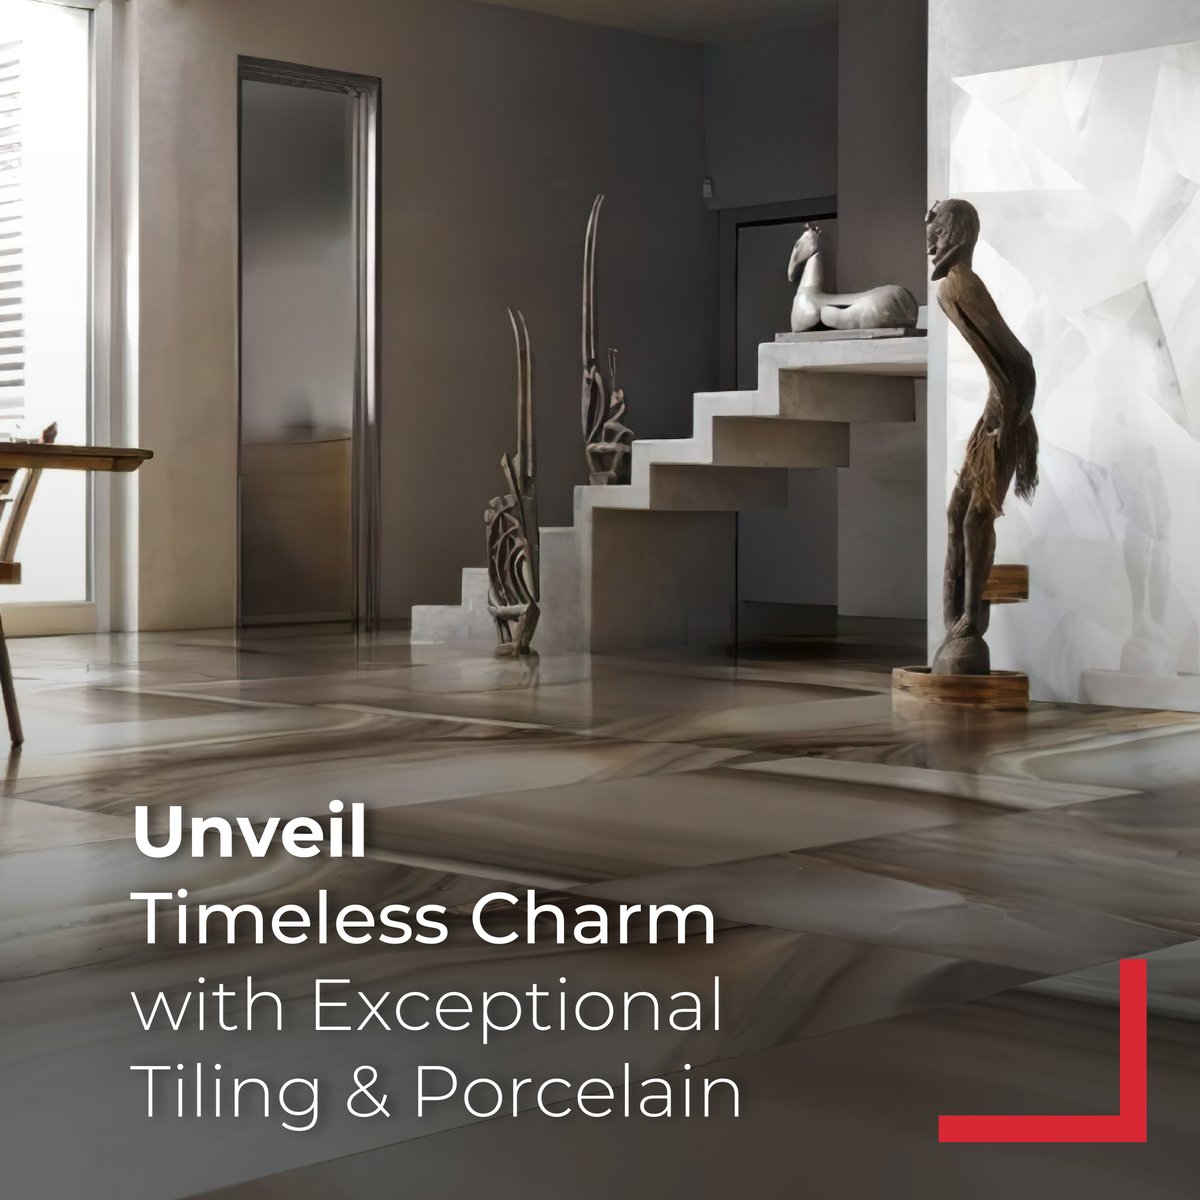 Lever Tiles: Where Timeless Charm Meets Modern Design: We bridge the gap between tradition and innovation, offering tiles that are both classic and contemporary.
#SeamlessDesign #LeverTiles #TailoredExcellence #lever #tiles #ceramics #architecture #dubai #abudhabi #uae